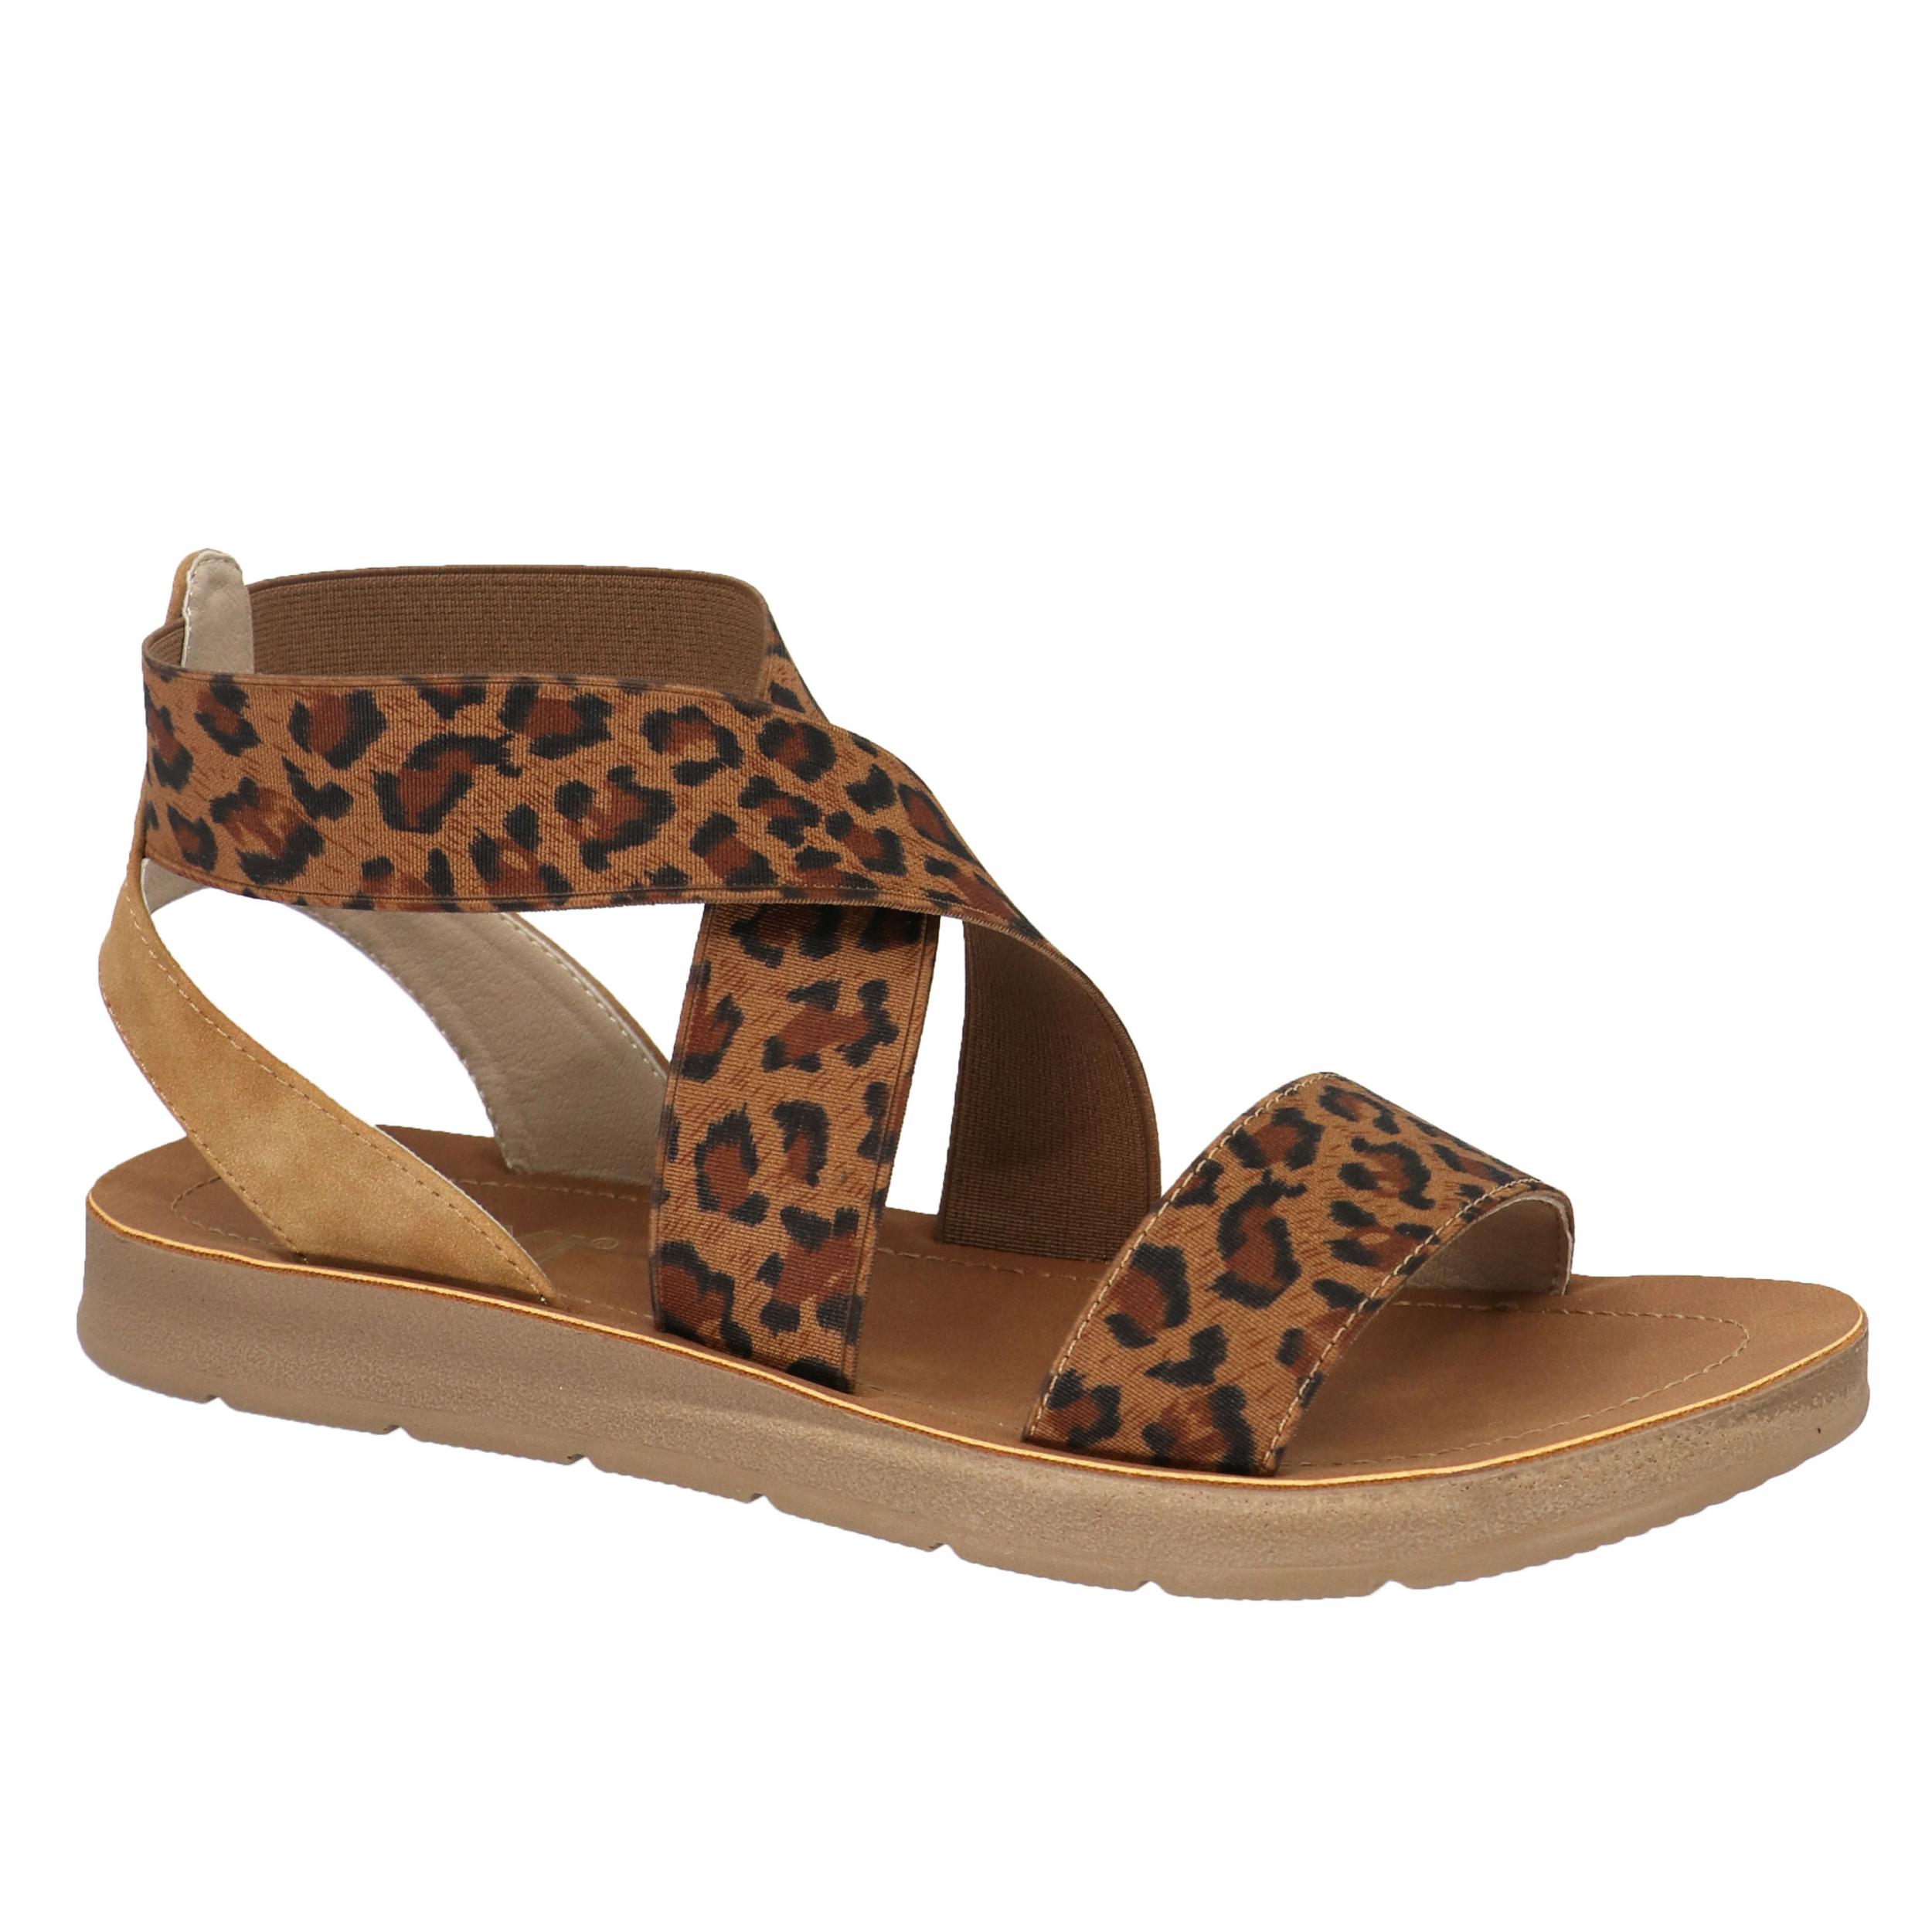 RIHANNA LEOPARD - SOLD OUT